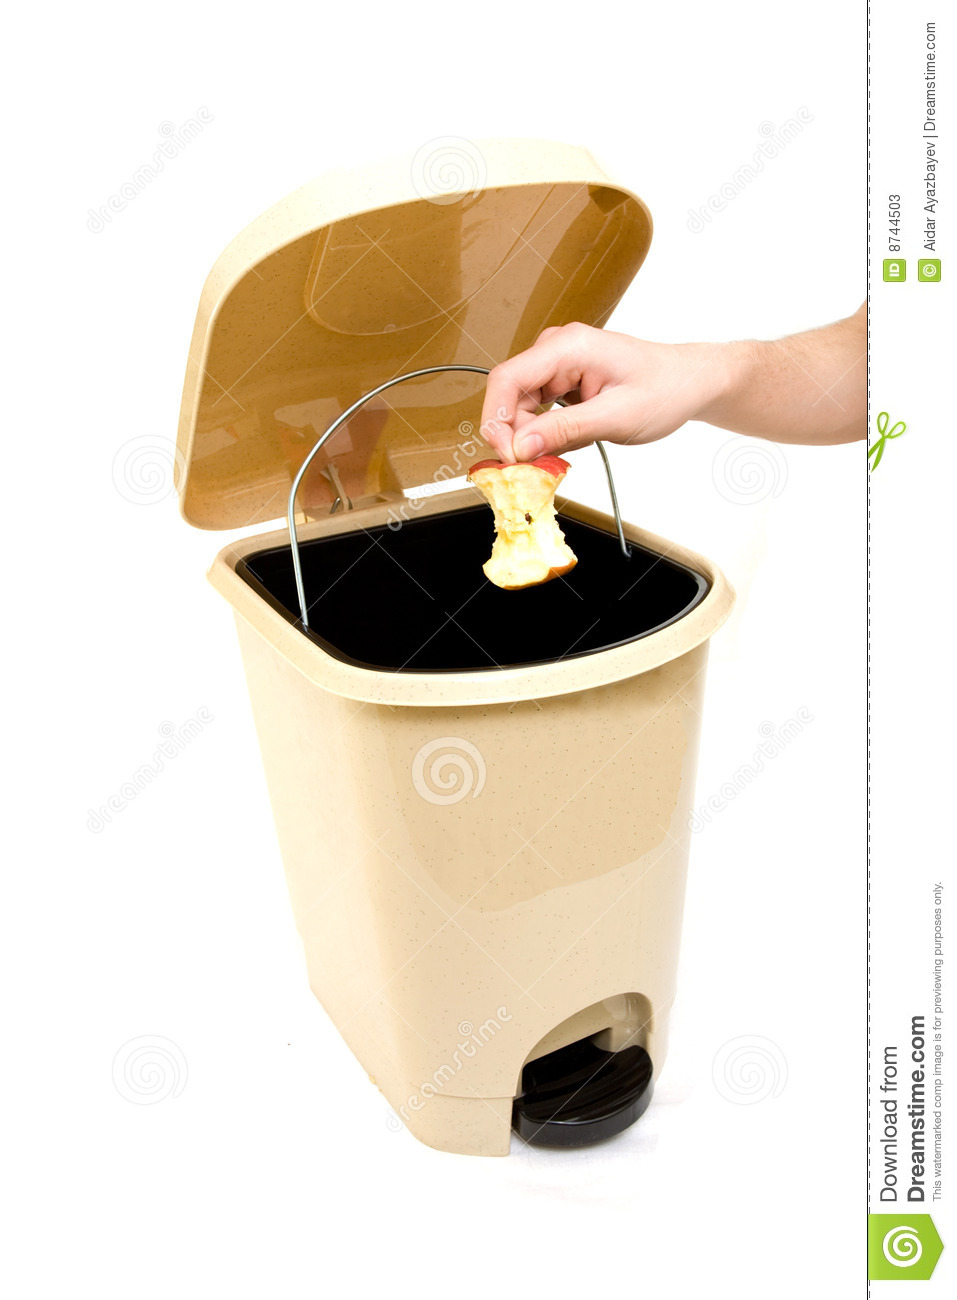 Hand Throwing Apple In Trash Stock Photos   Image  8744503